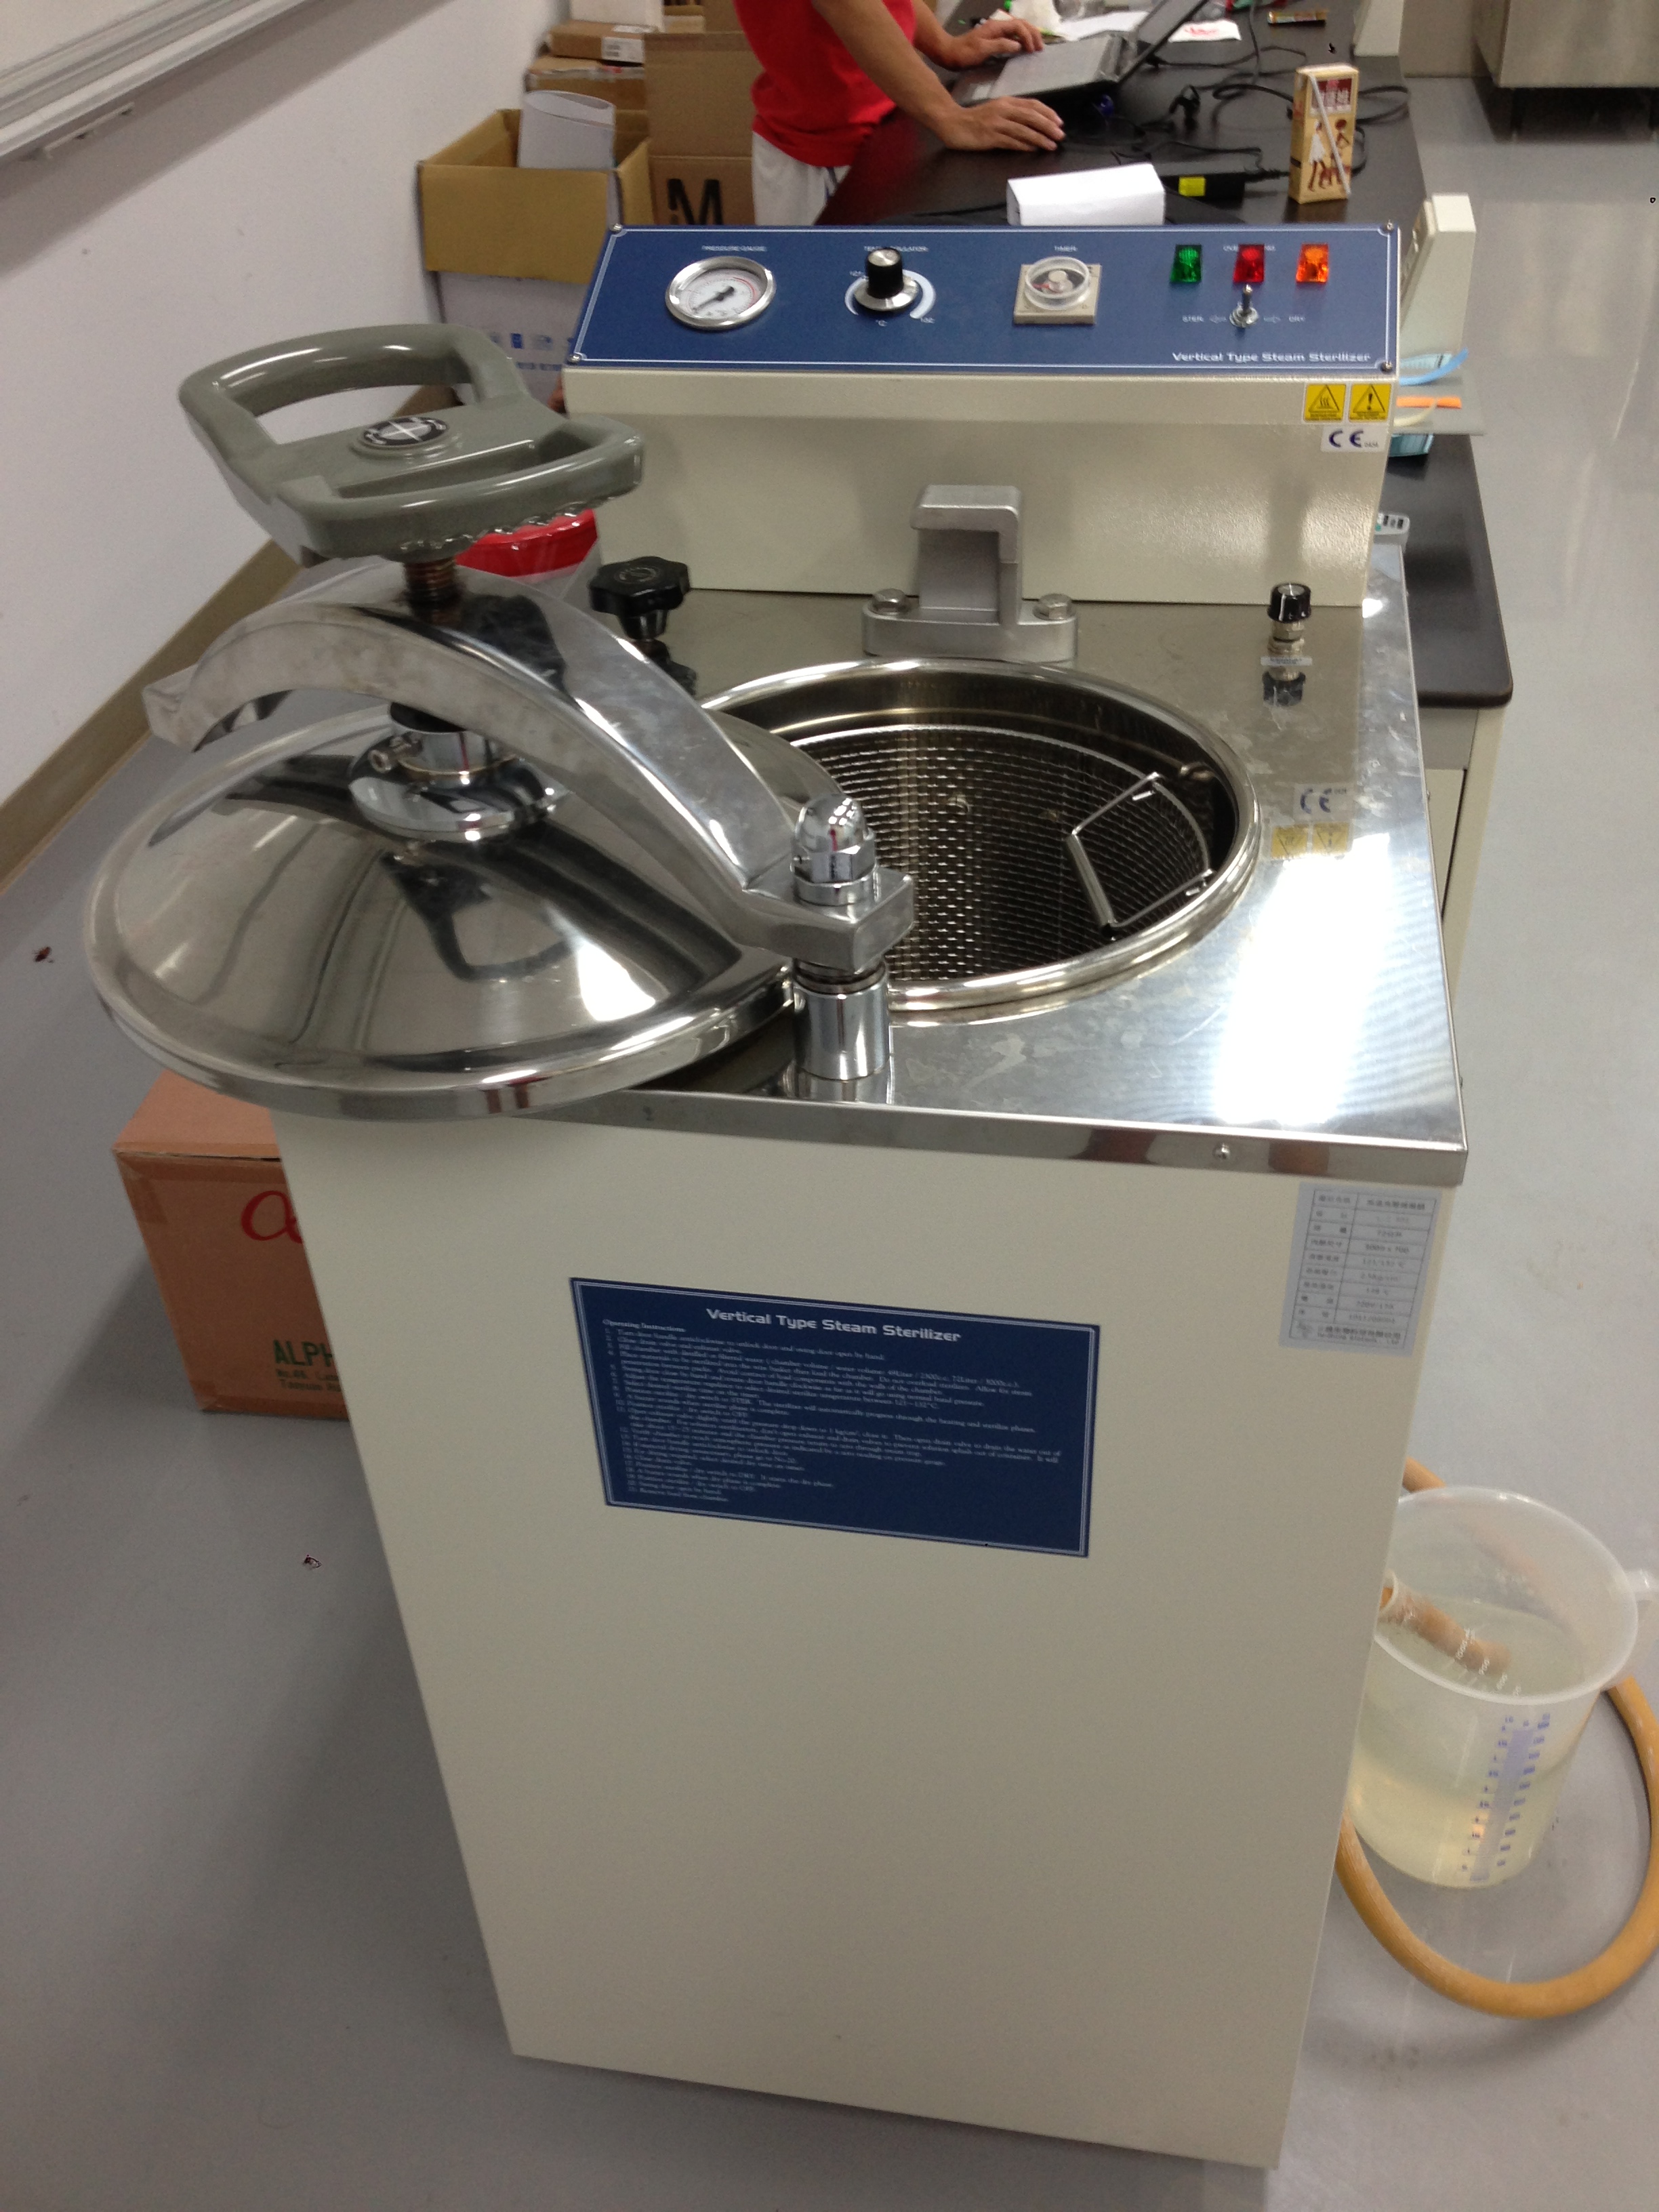 Fig 2. Sterilizer - All wastes are sterilized before disposal.